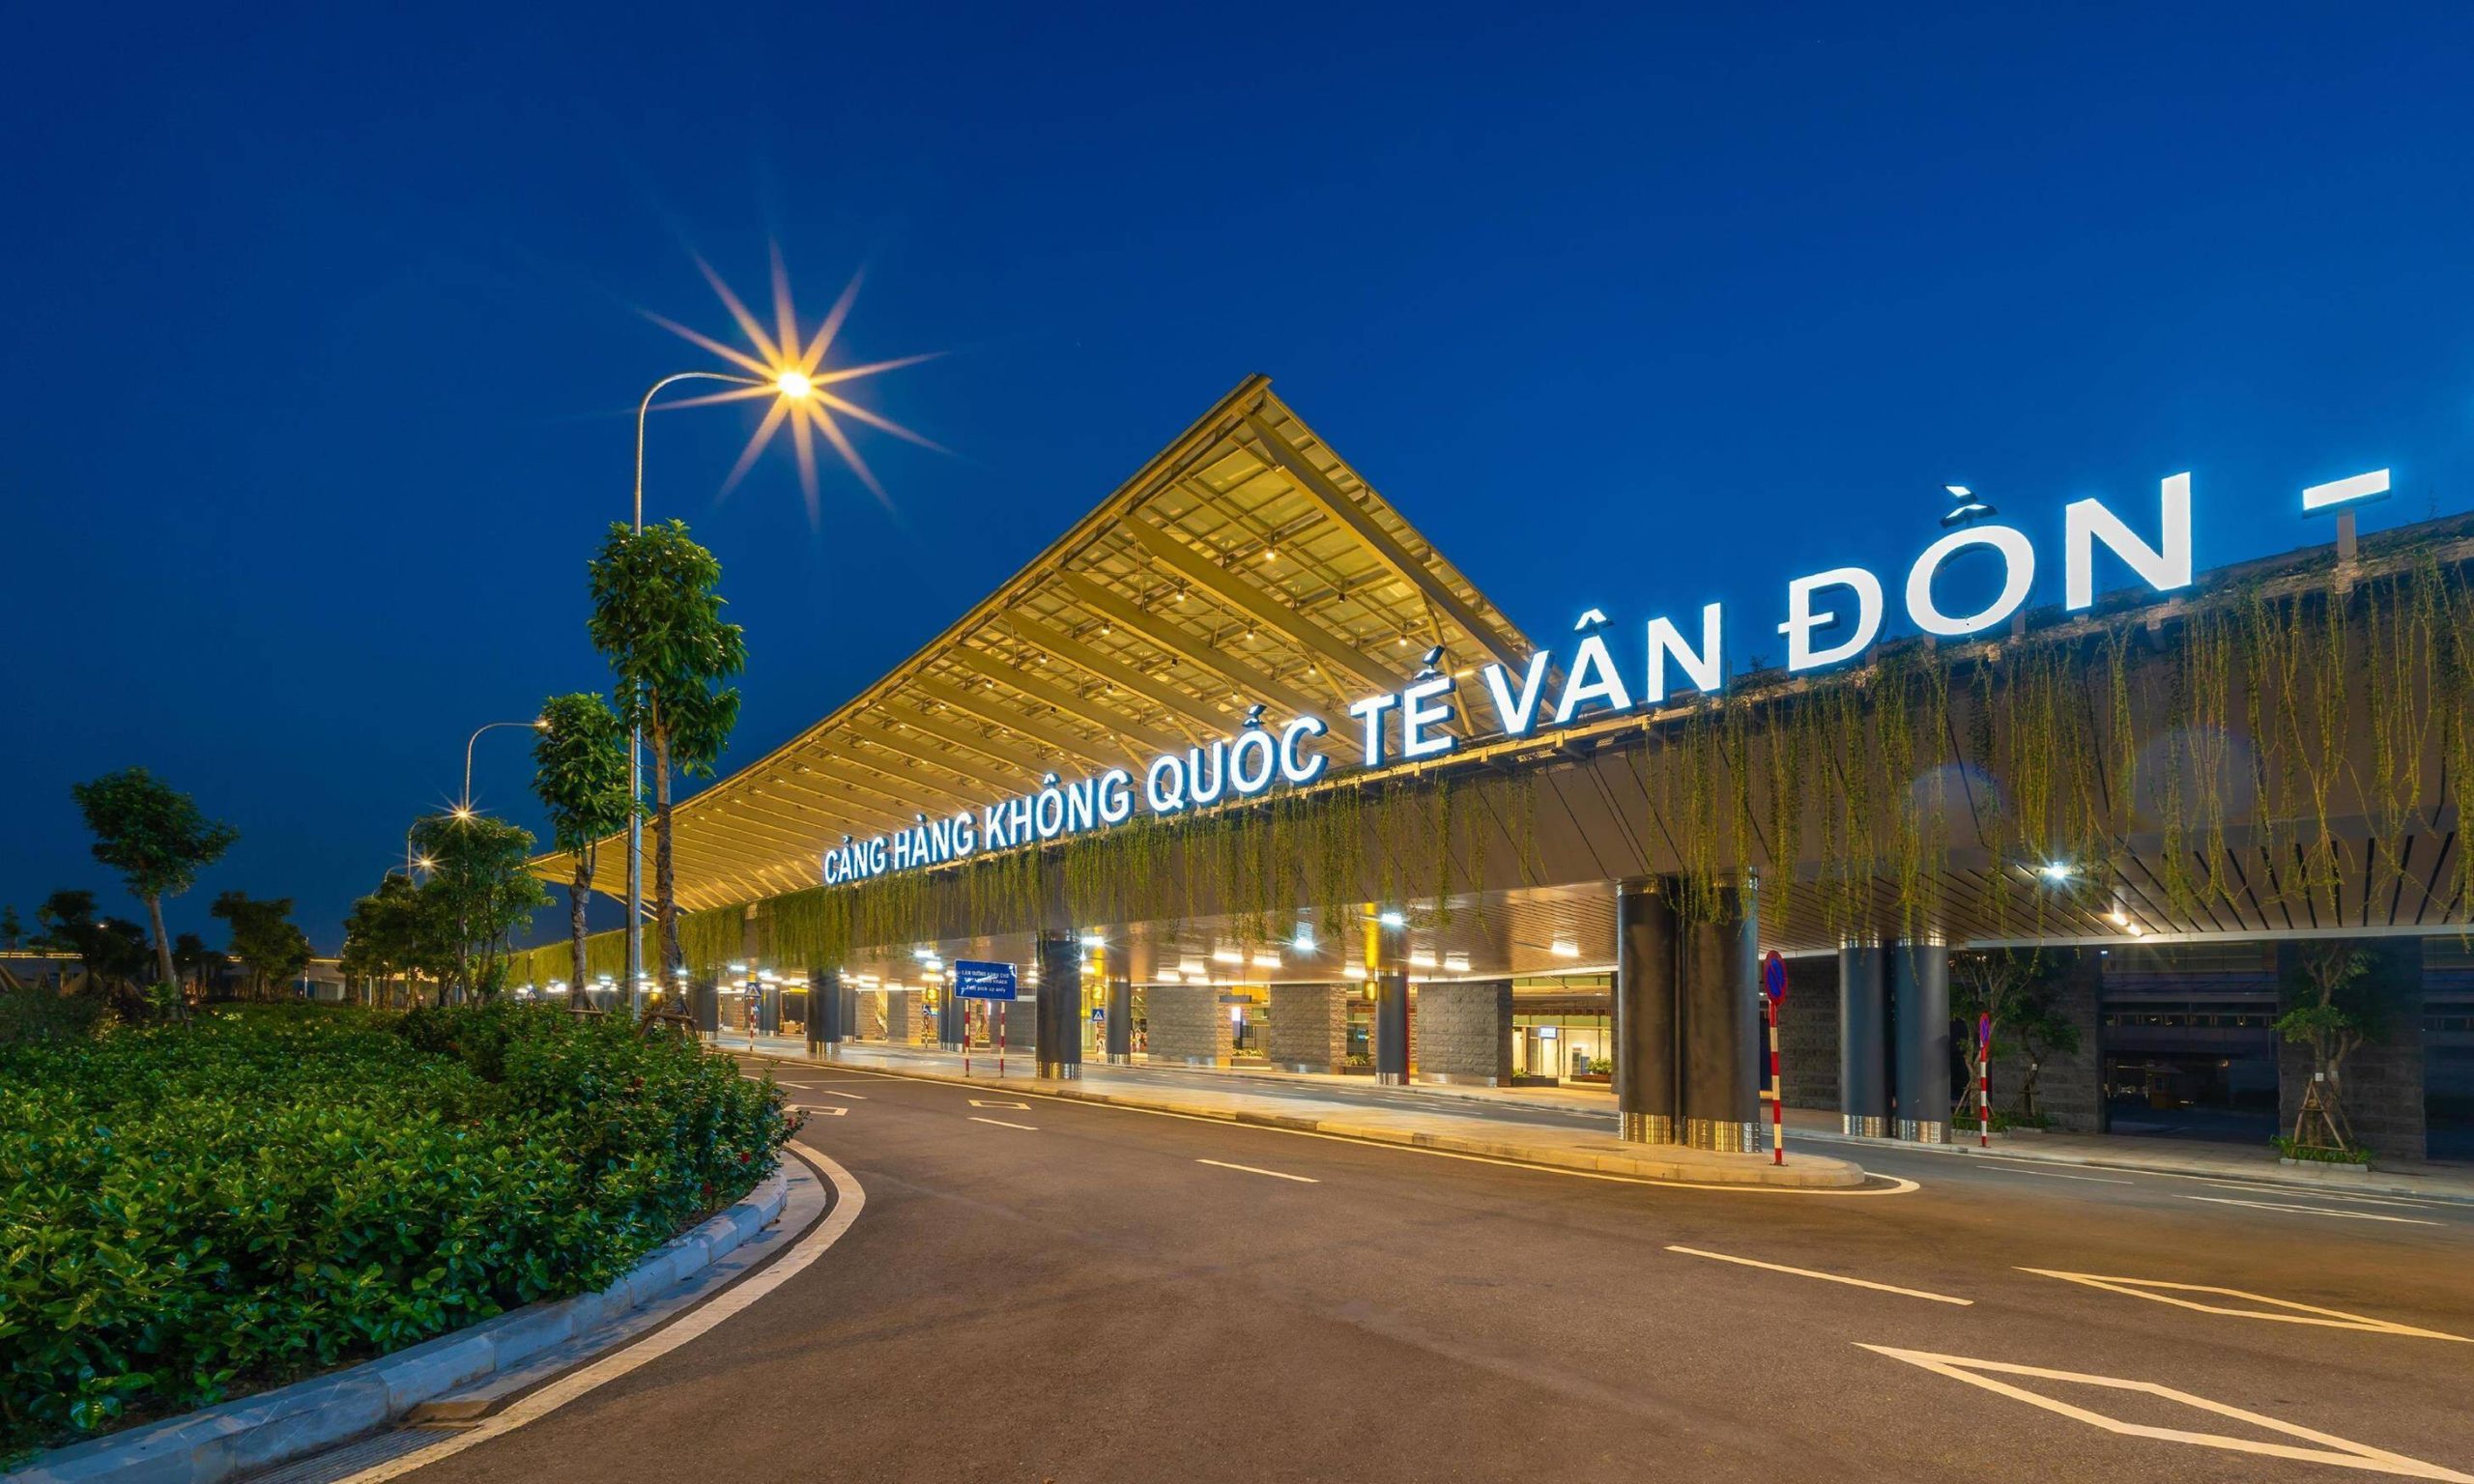 Foreigners With E-Visa Can Enter Vietnam Through Van Don Airport From April 2022